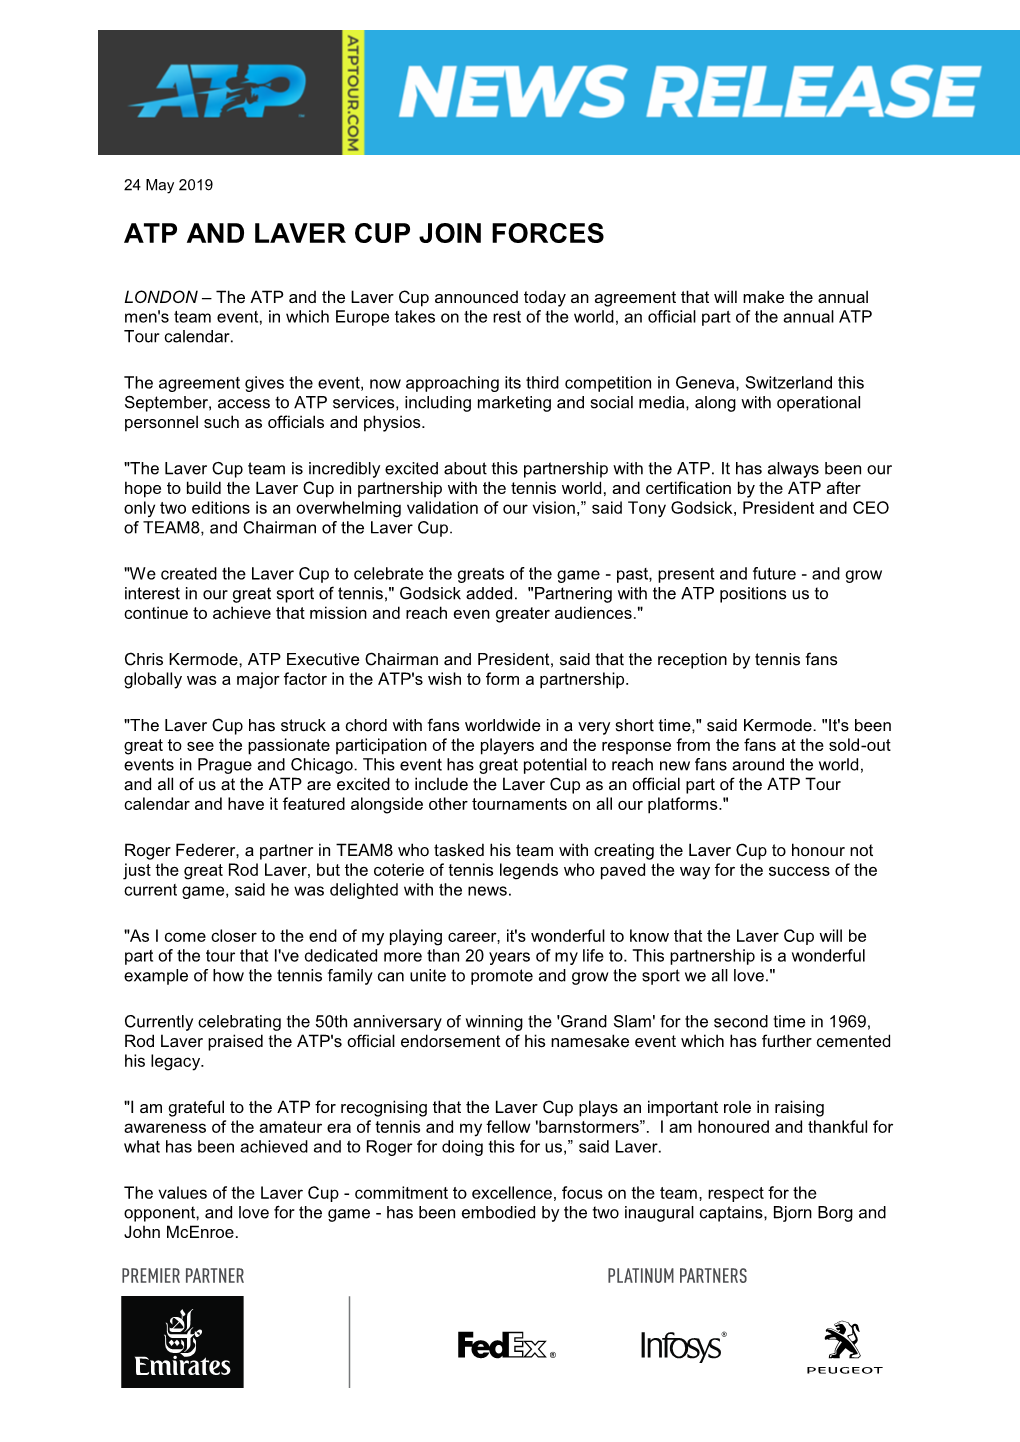 Atp and Laver Cup Join Forces